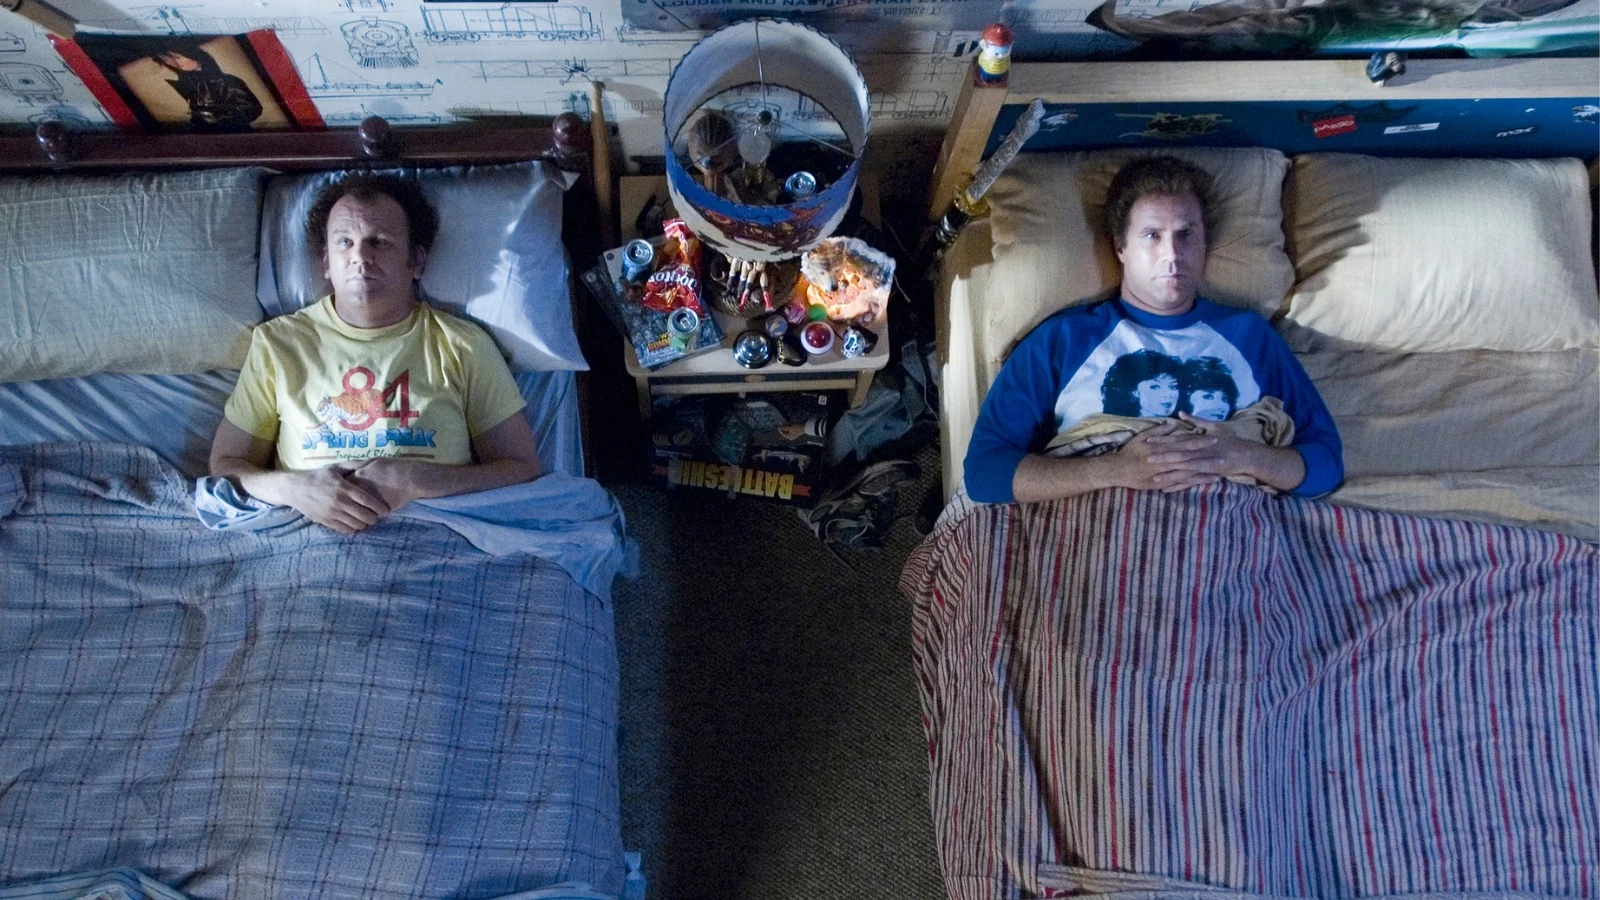 The two step brothers lying in adjacent beds. 